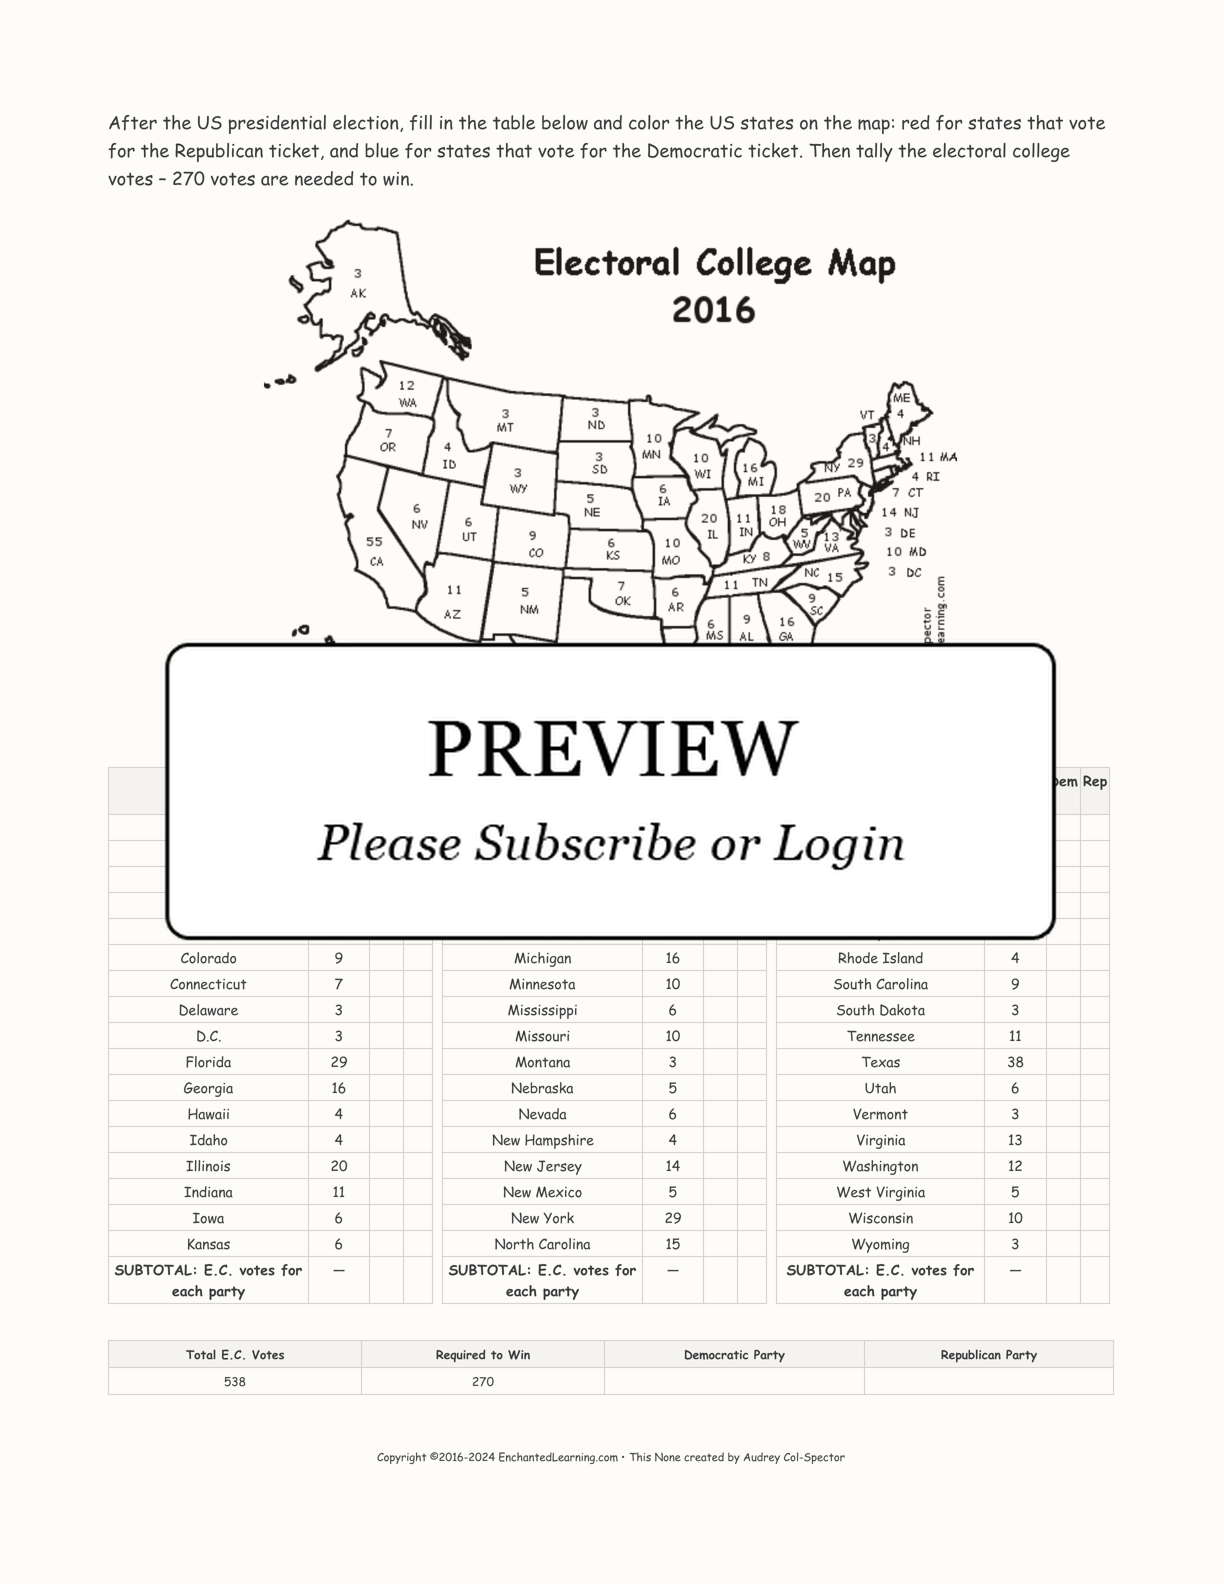 Electoral College Map Coloring Activity 2016 interactive worksheet page 1